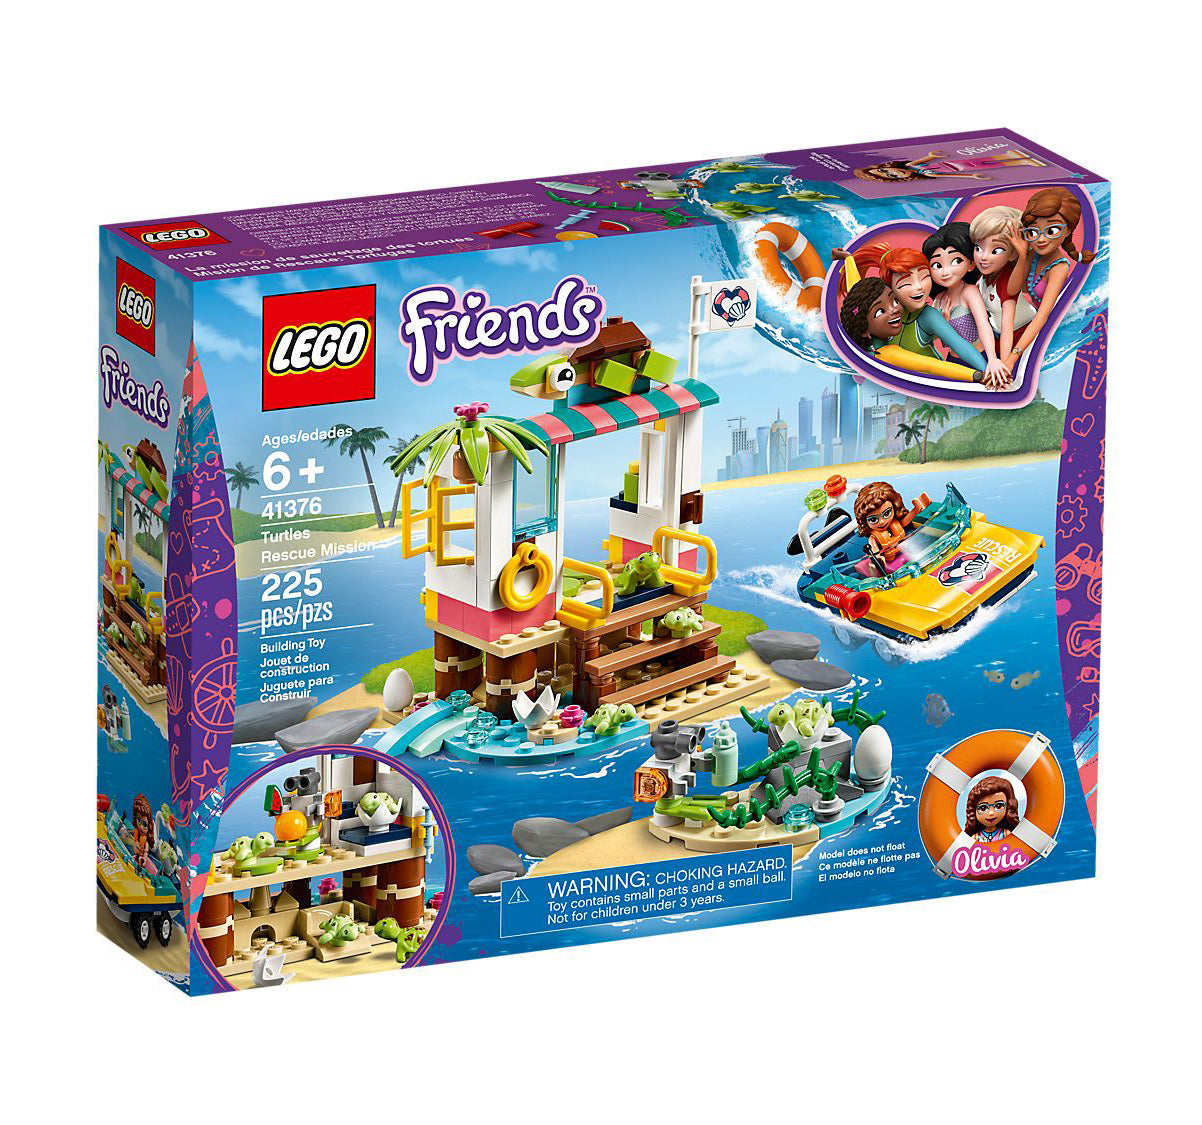 Lego Friends Turtles Rescue Mission 41376